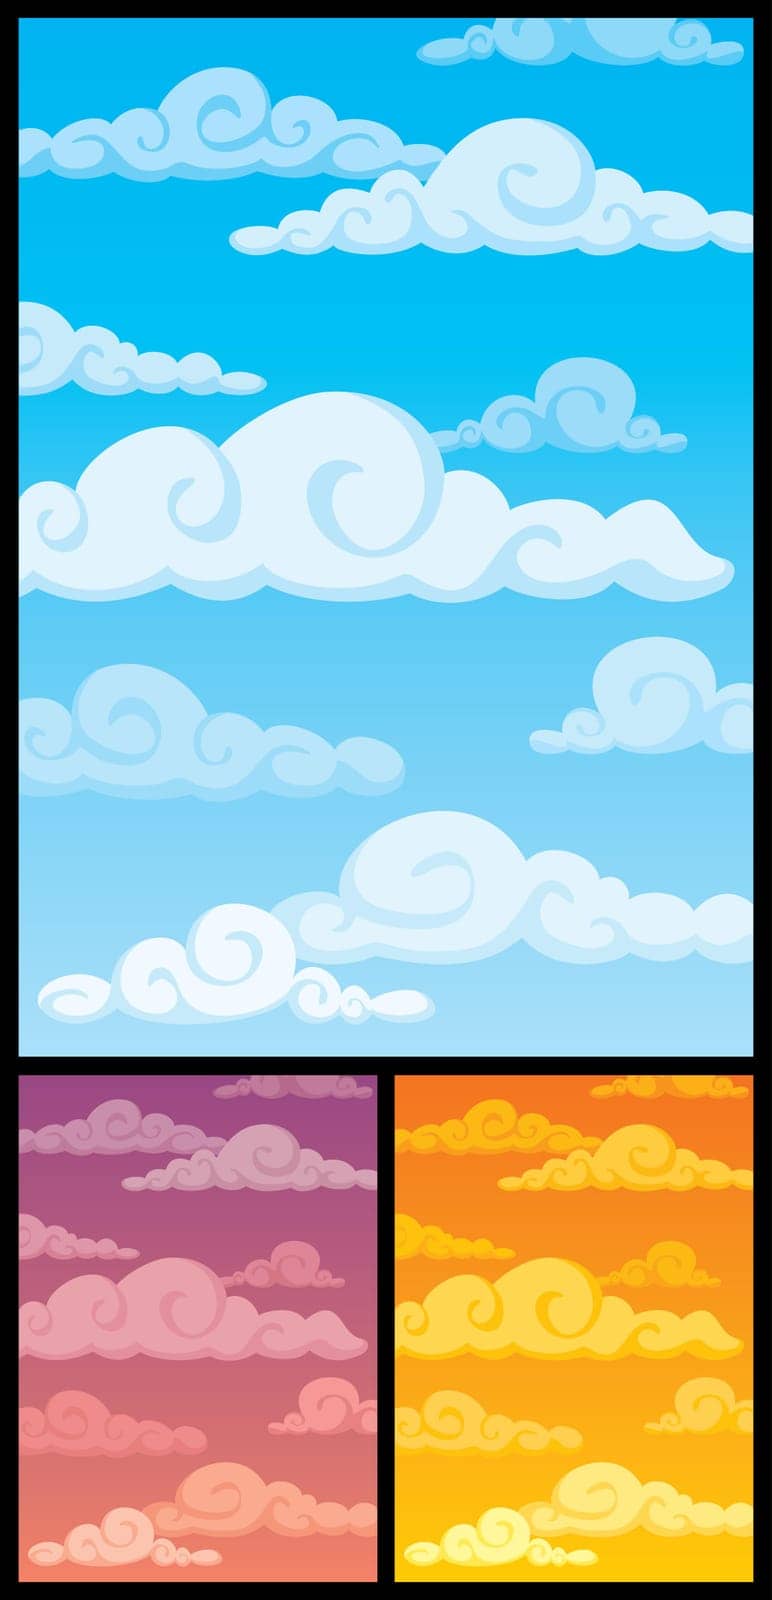 Cartoon cloudscape. Below are 2 more versions, differing in color. 